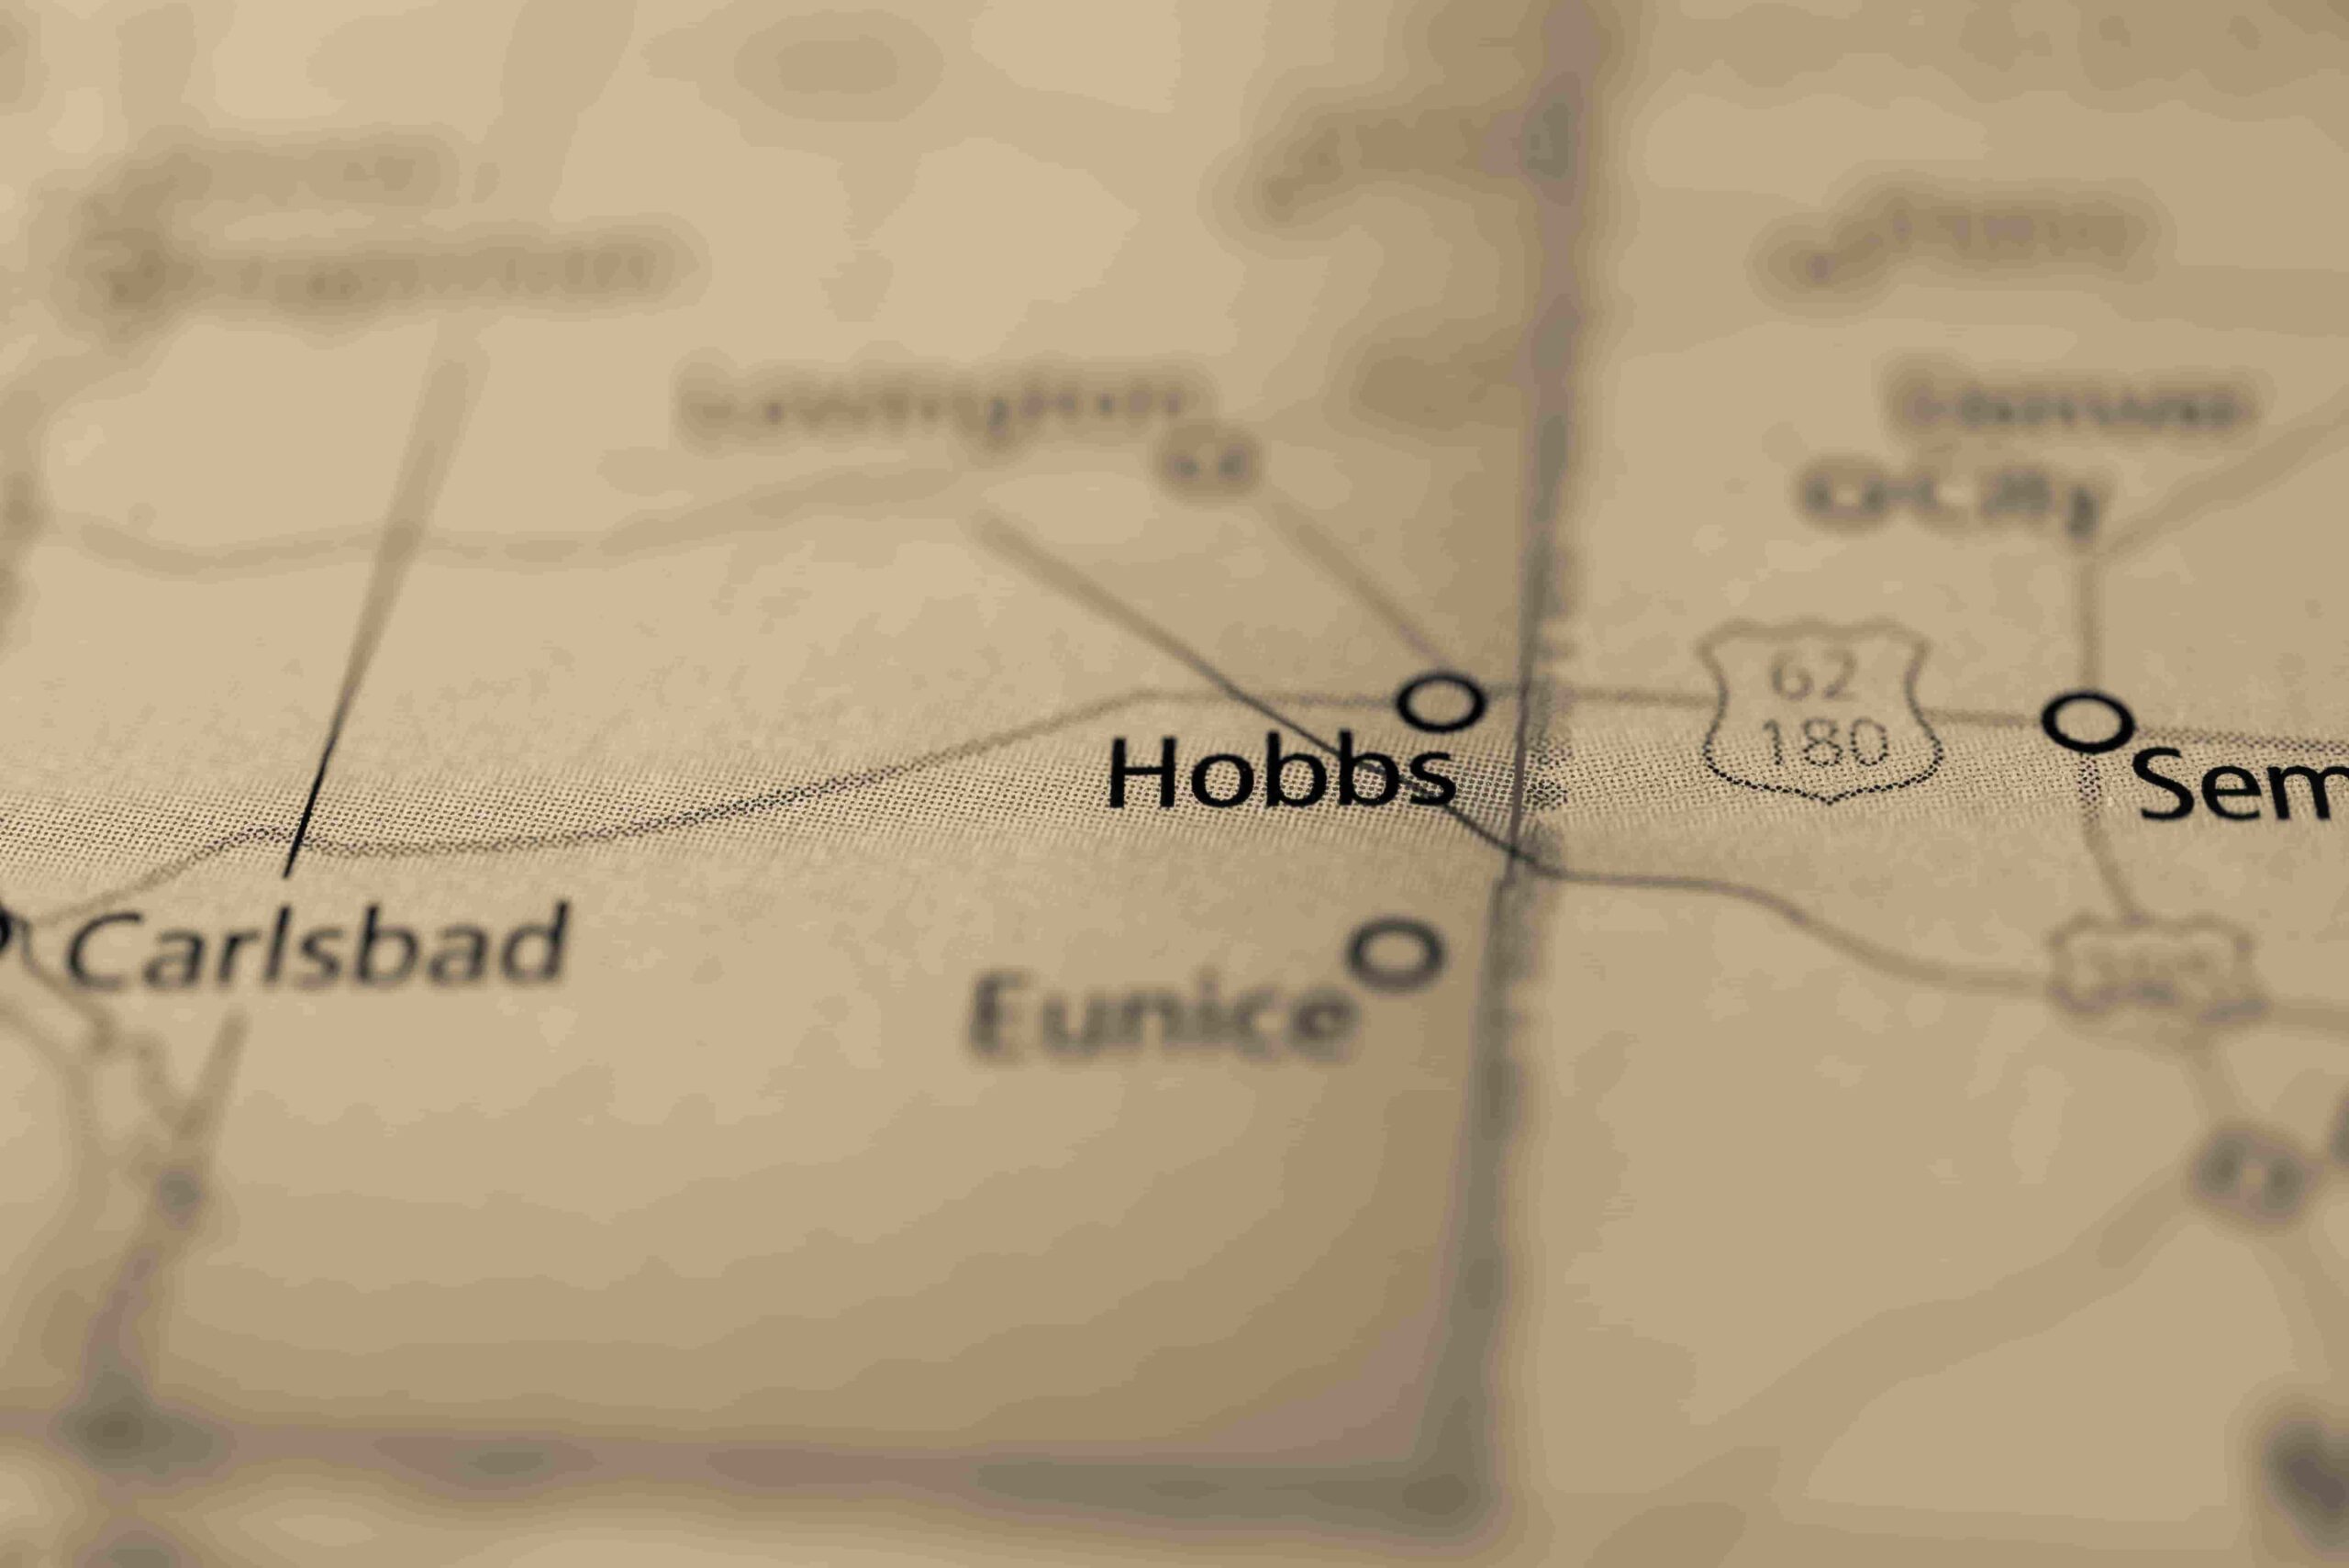 Personal injury attorney in Hobbs, NM